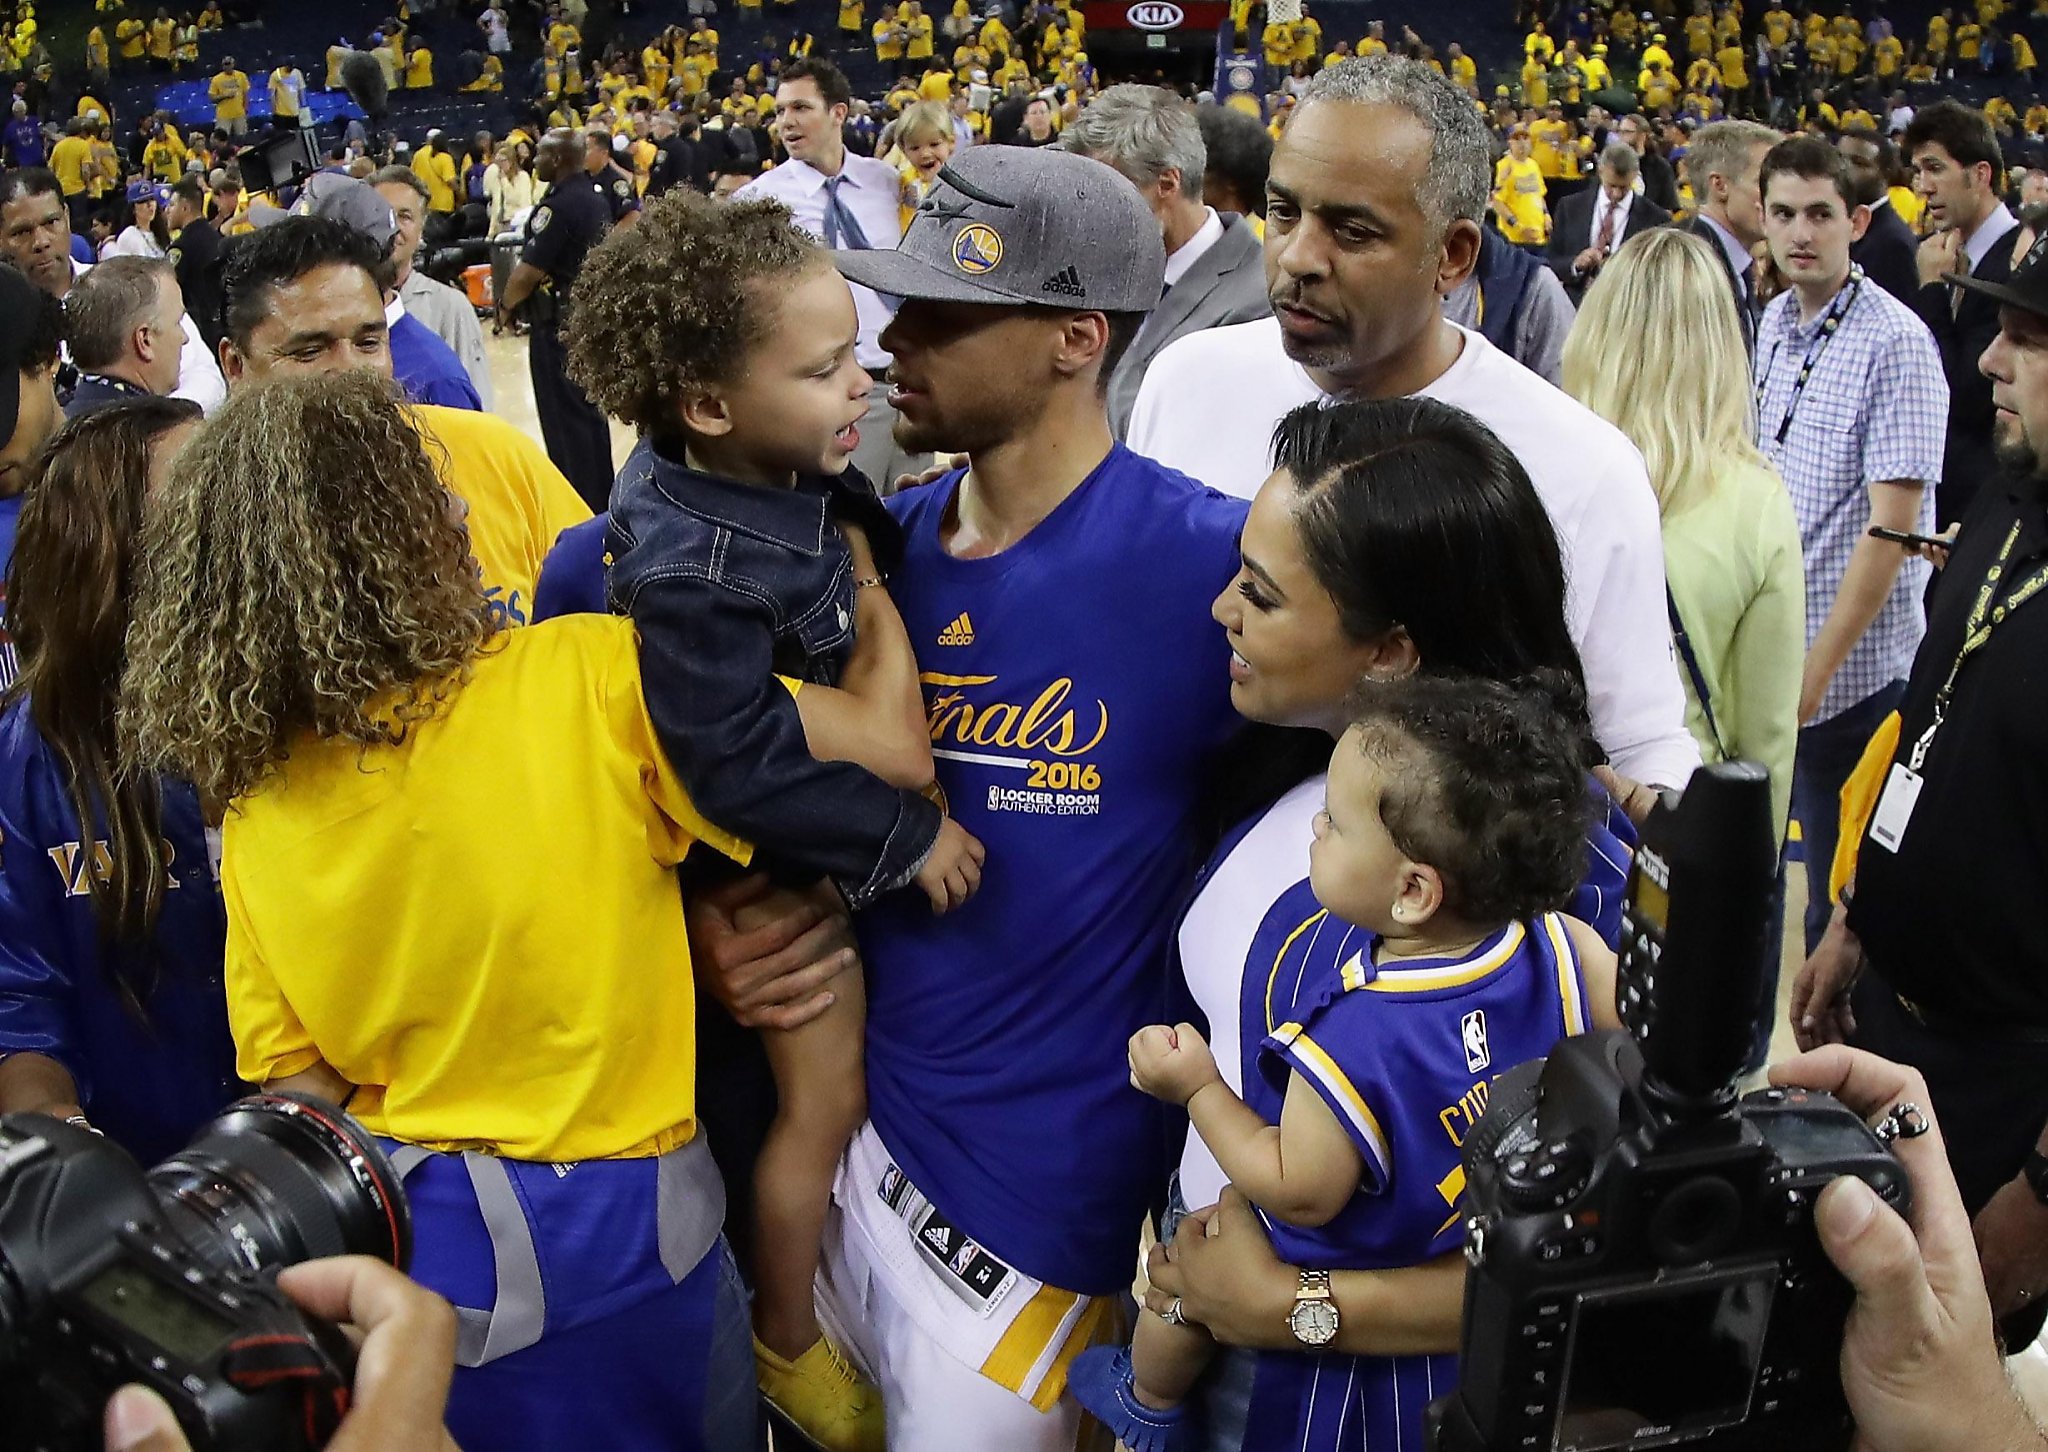 Steph Curry's Family & Parents: 5 Fast Facts You Need to Know